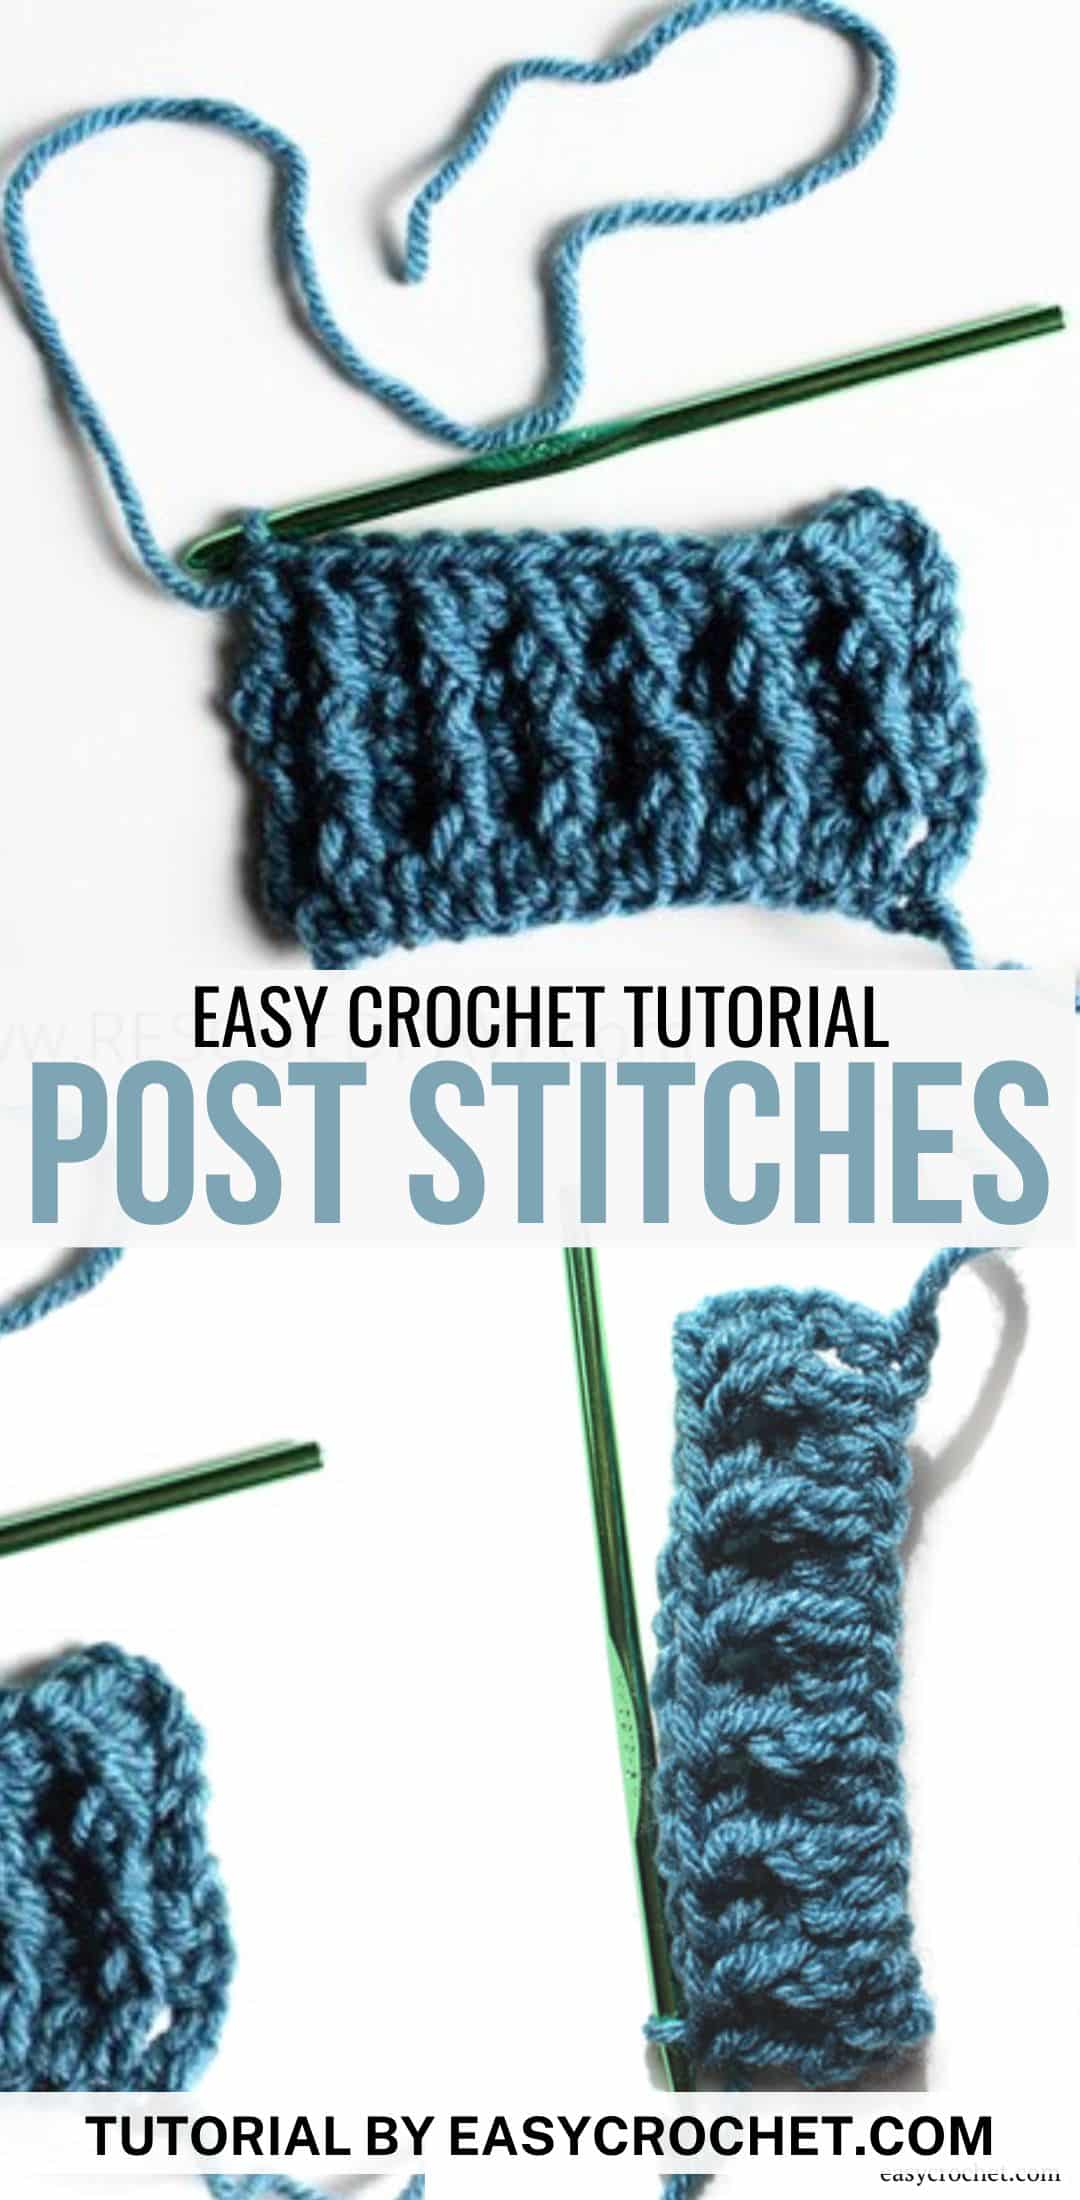 crochet post stitches front and back